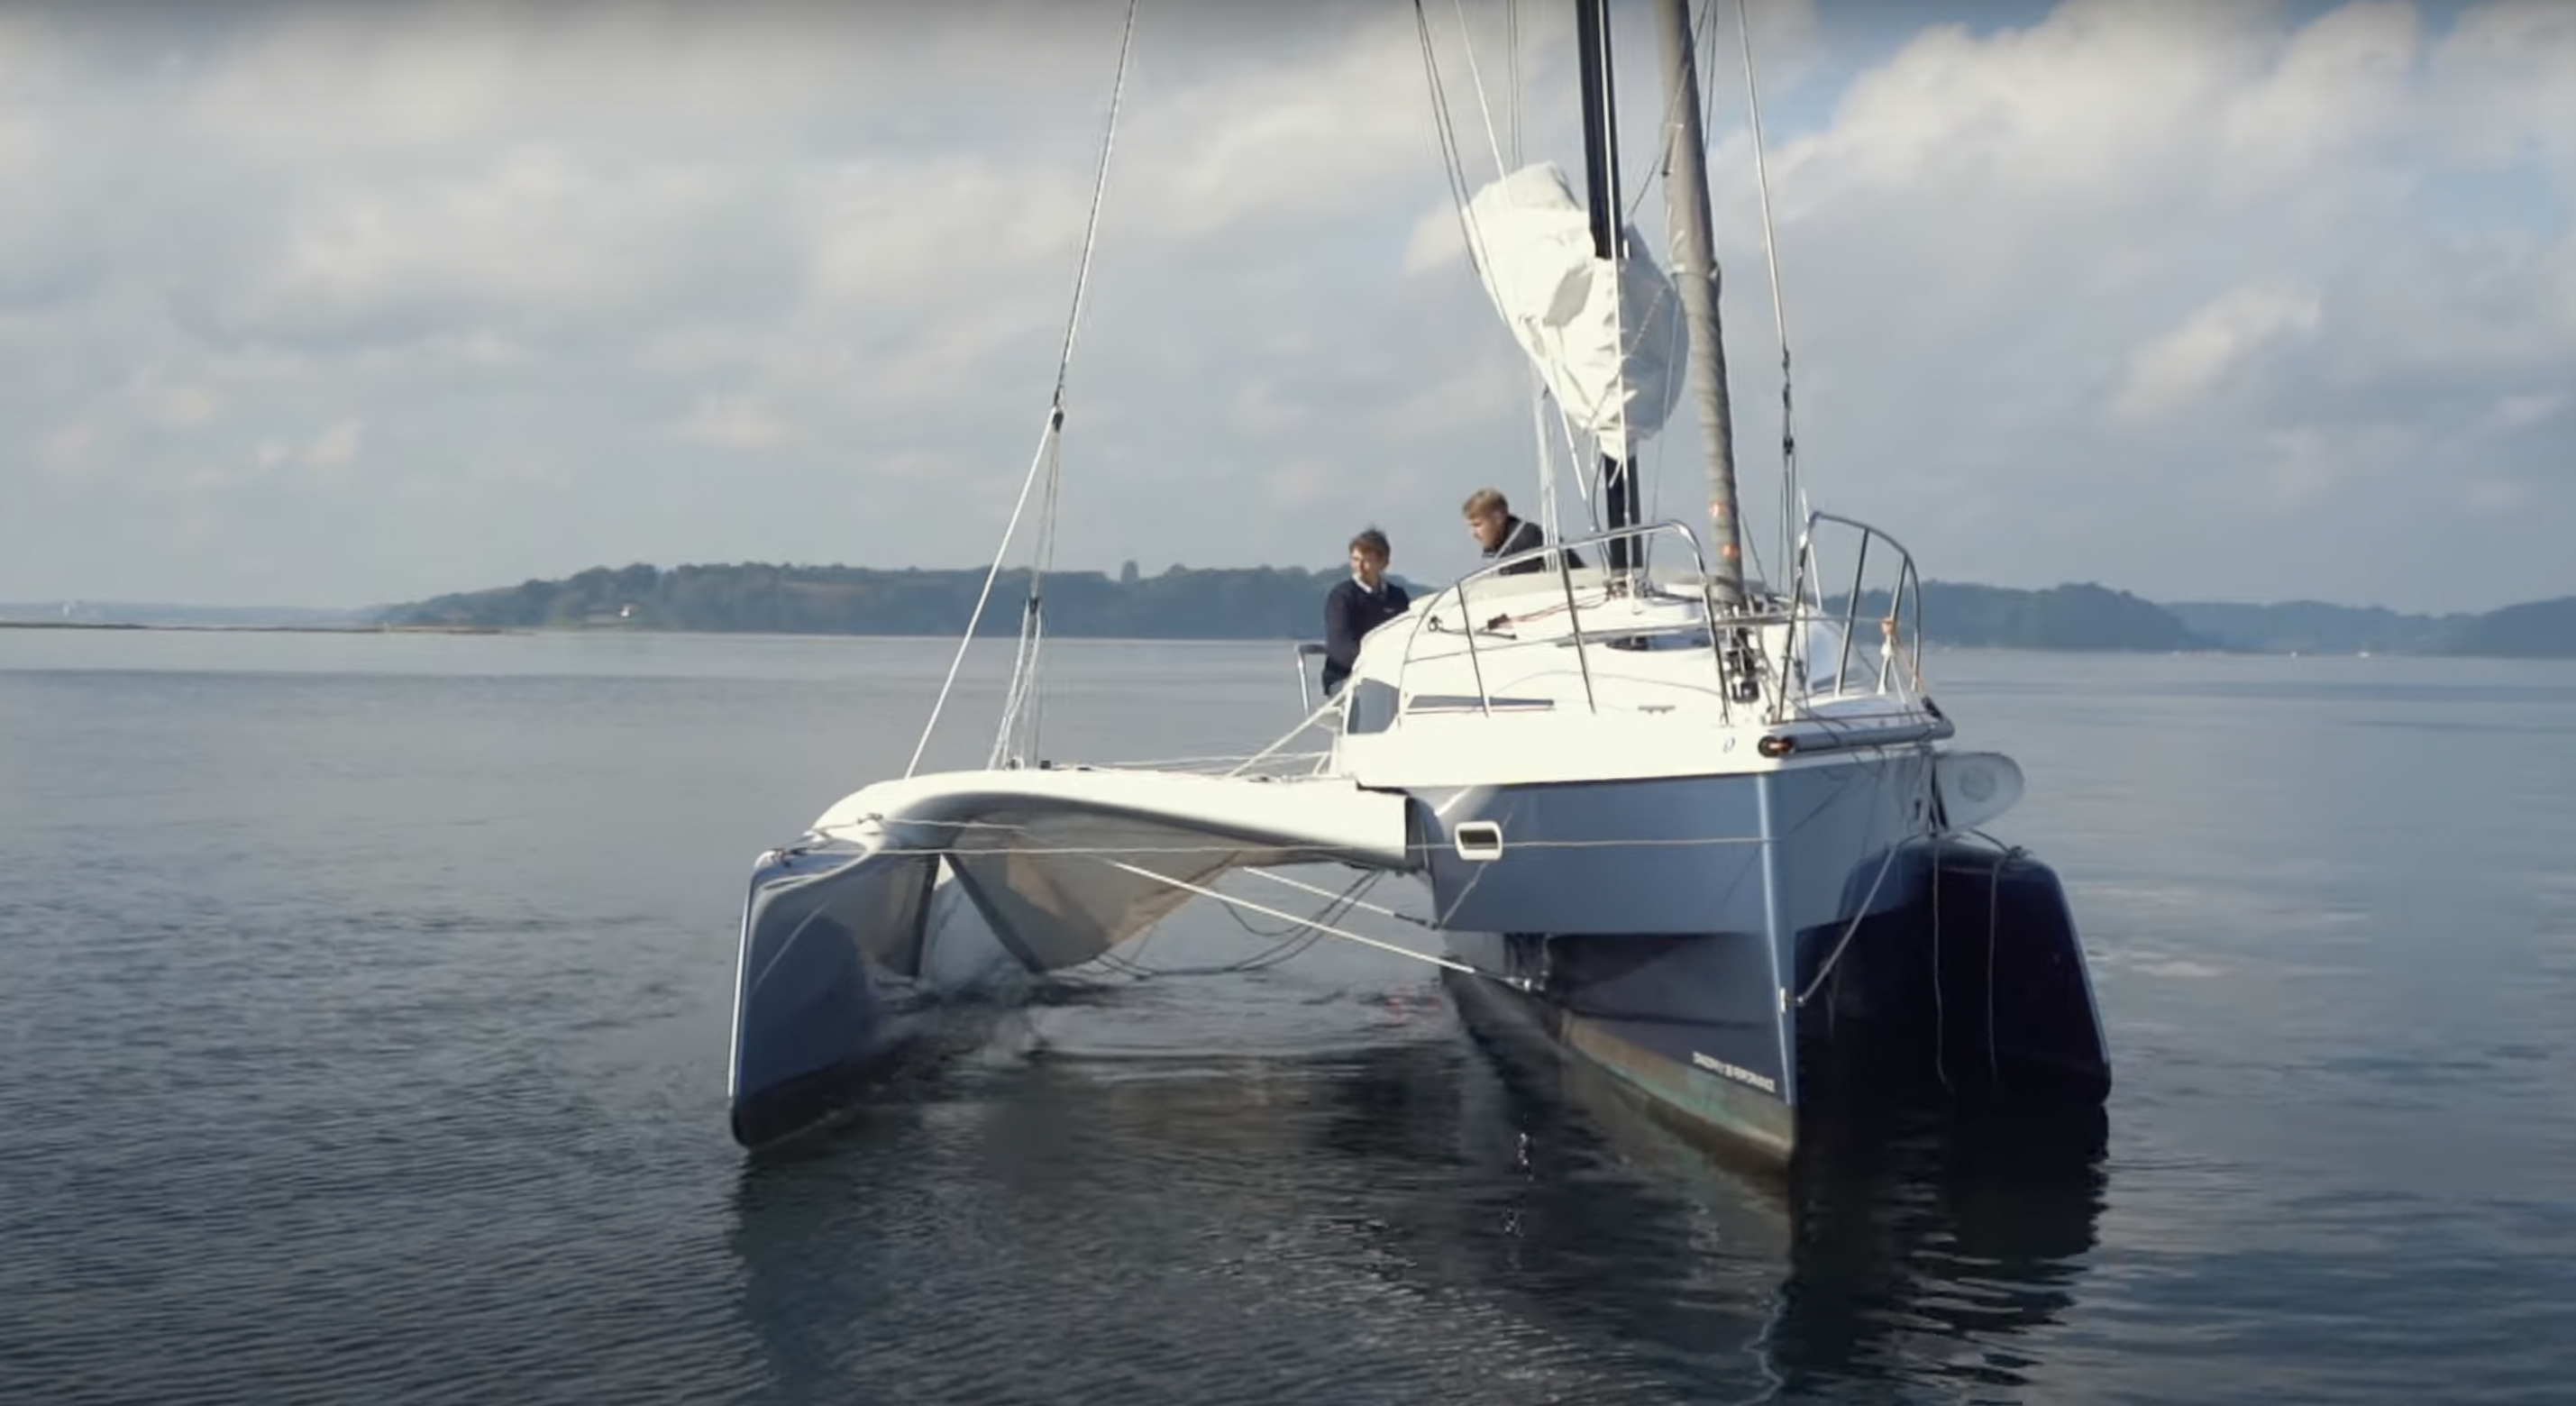 Dragonfly Trimaran Boat Functions – The Swing Wing System